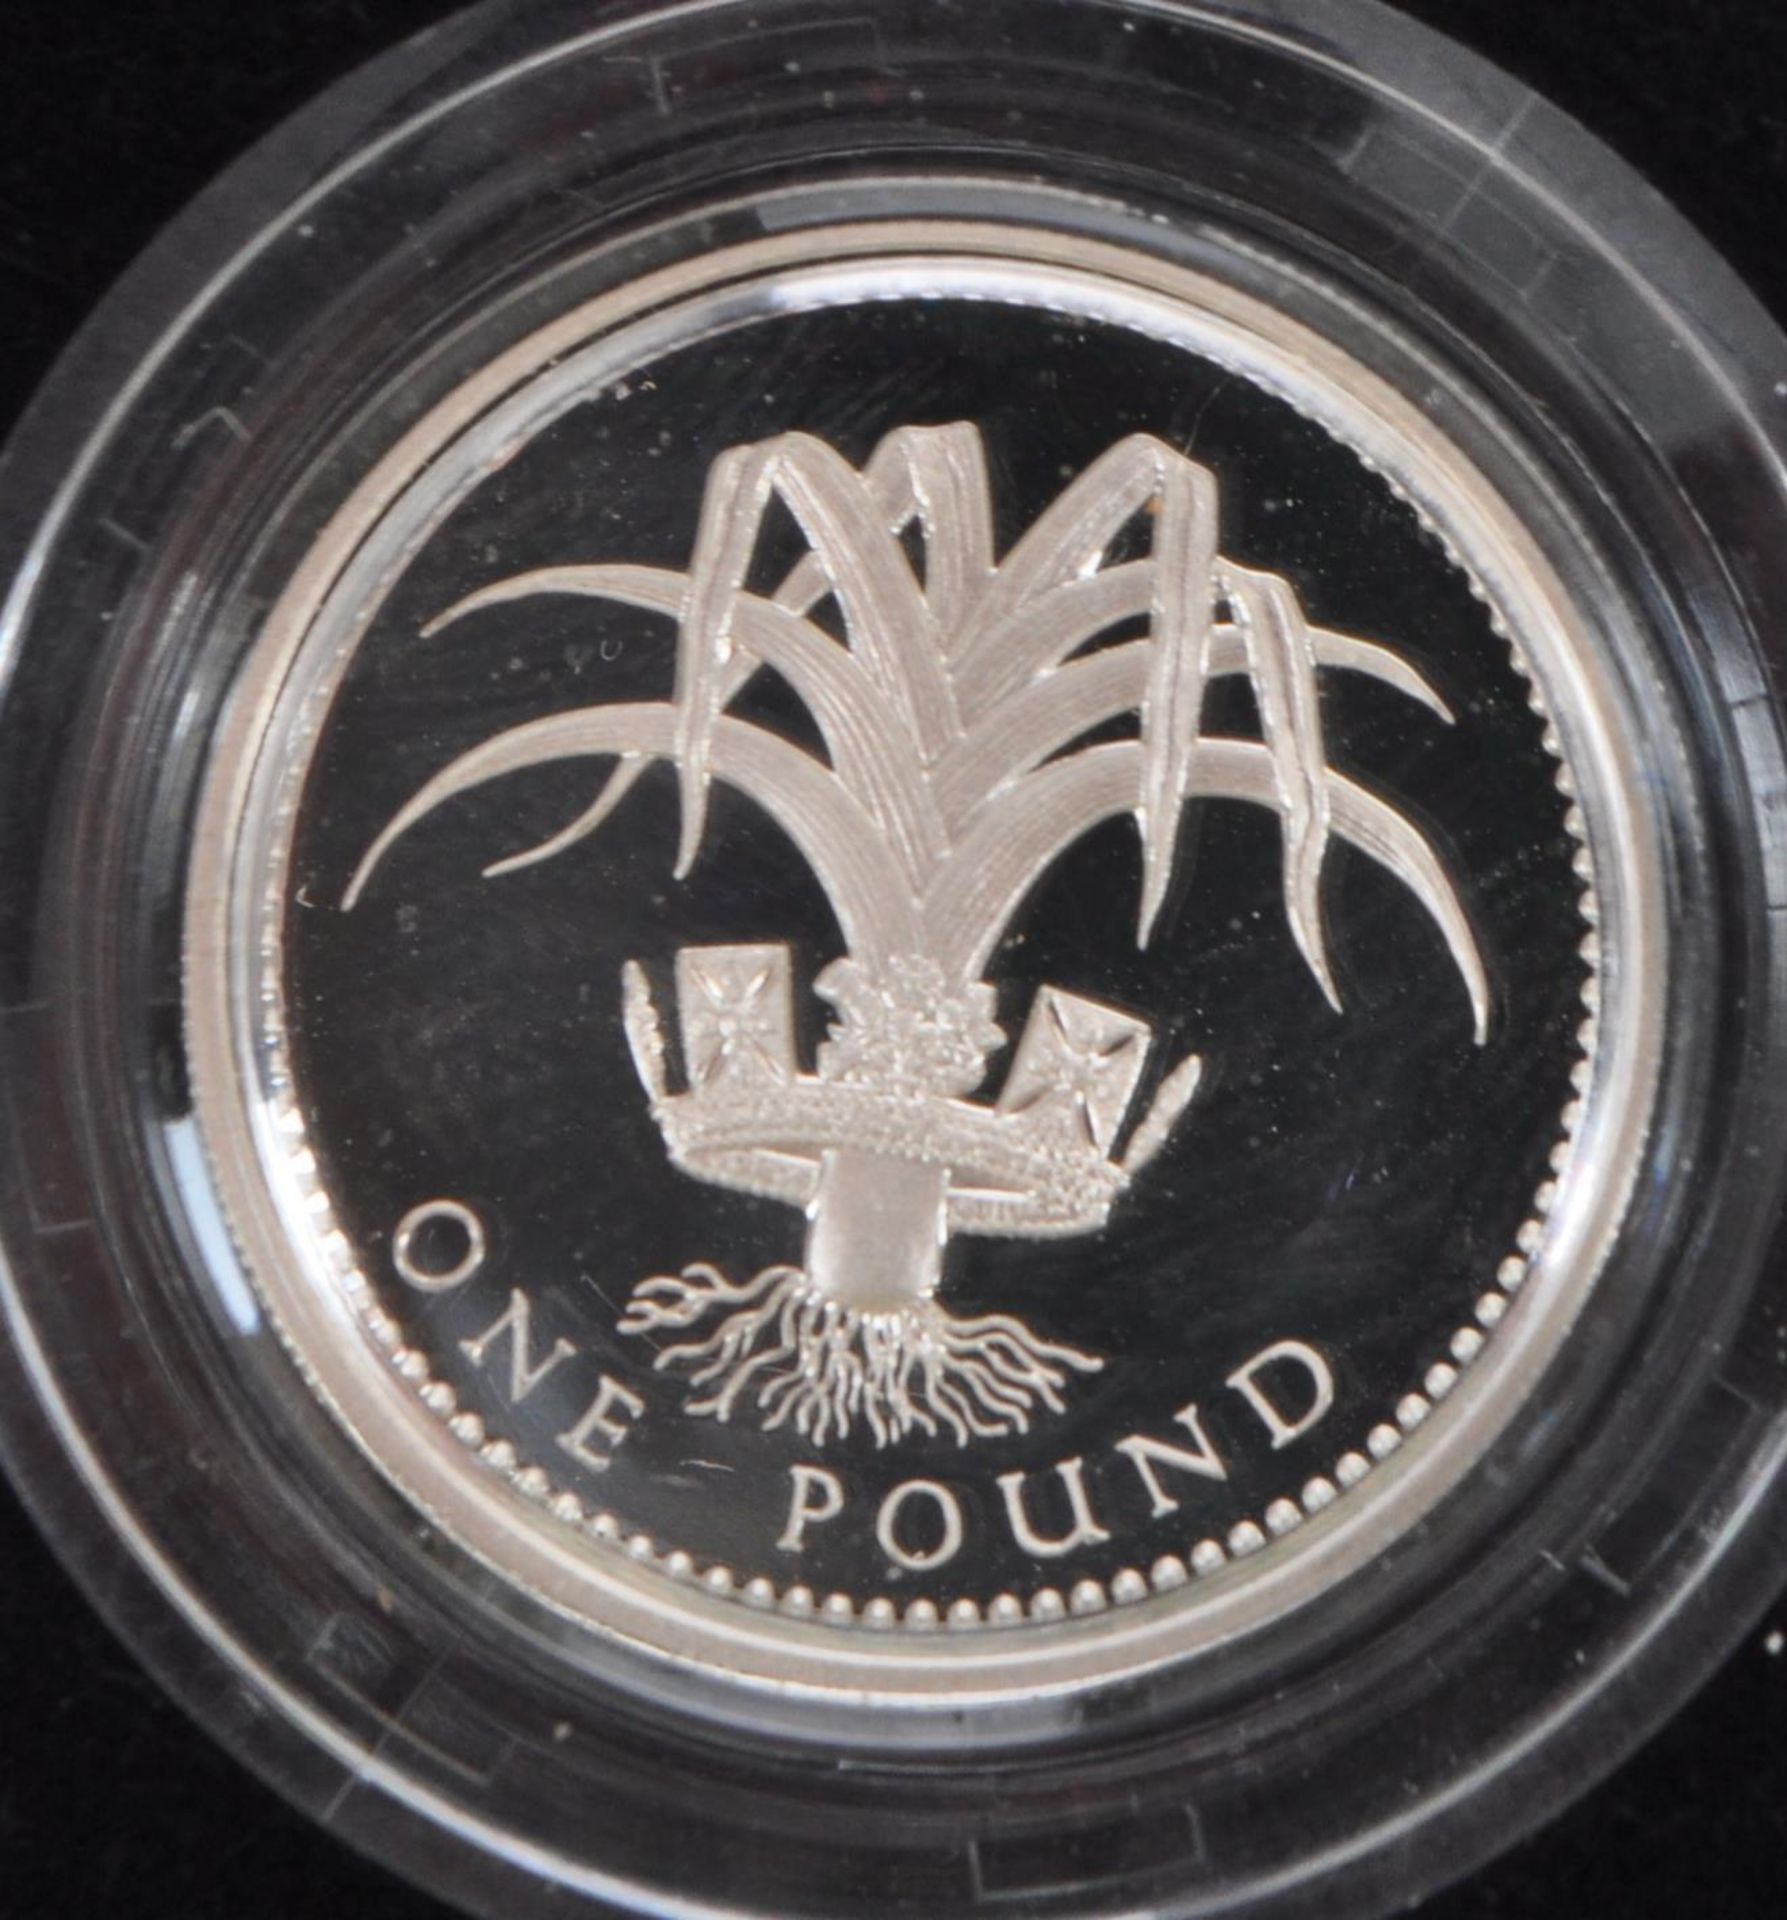 SET OF FOUR ROYAL MINT SILVER PROOF ONE POUND / £1 COINS - Image 5 of 6